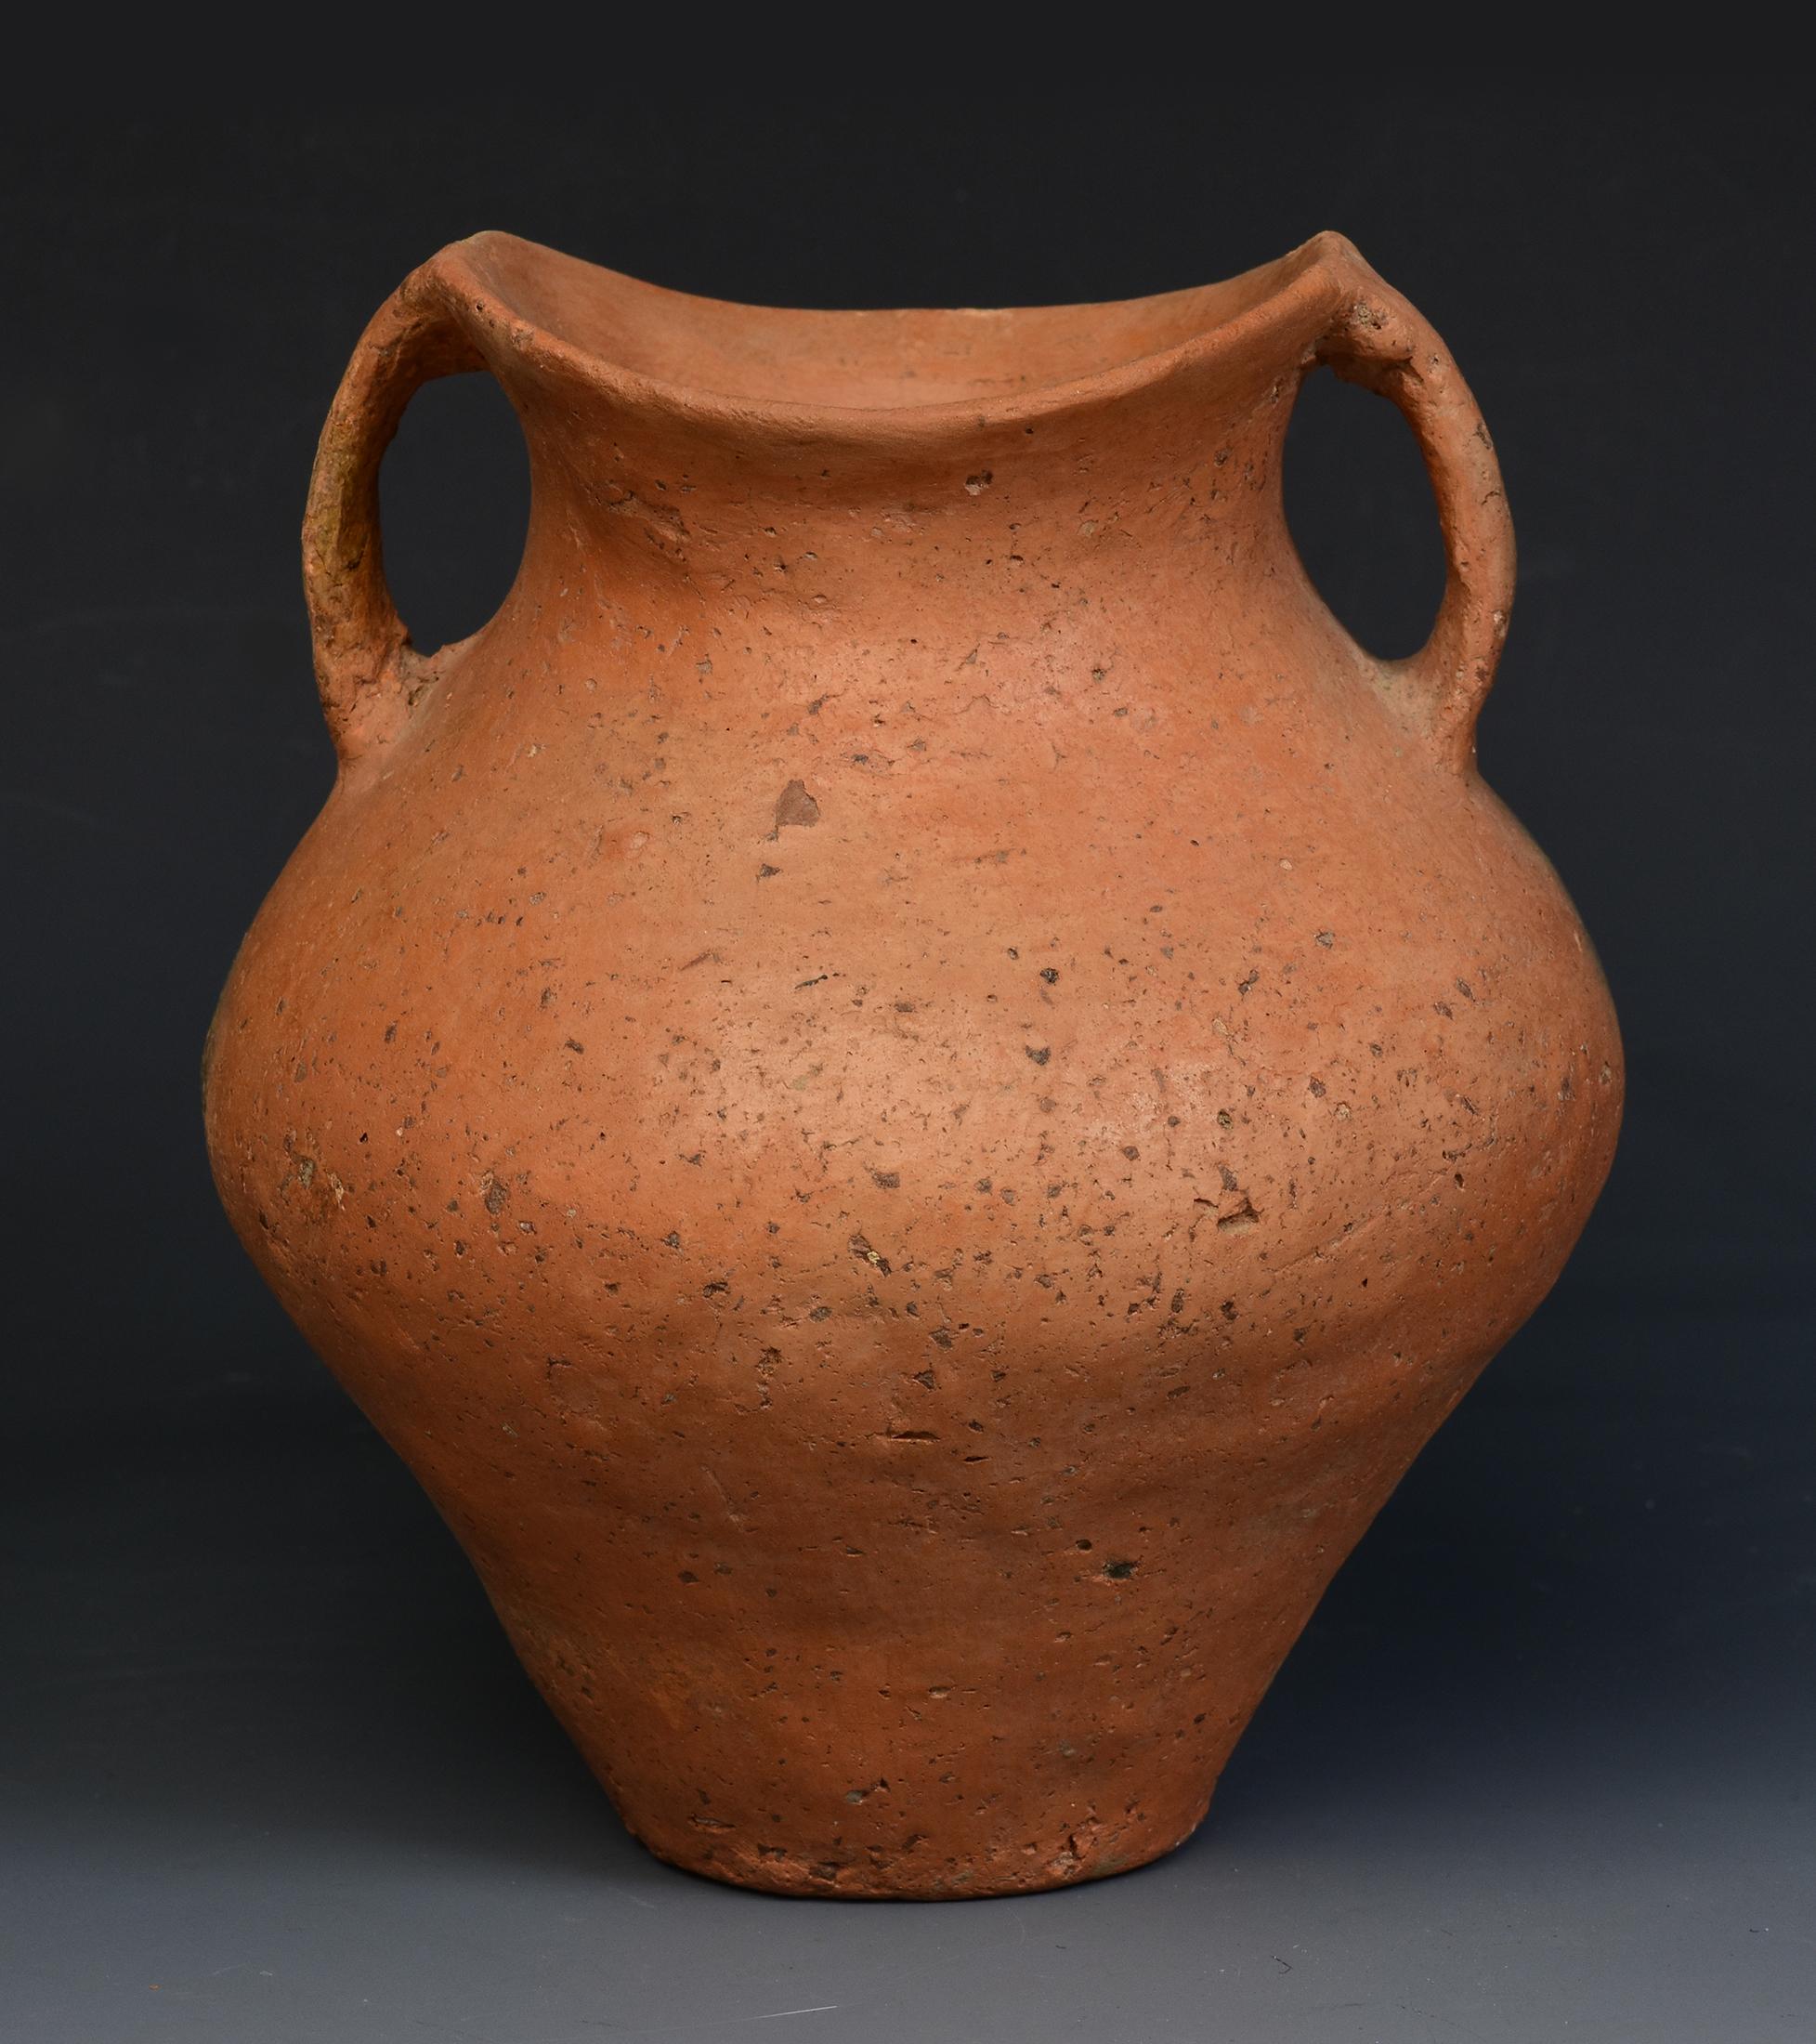 Antique Chinese Neolithic Siwa culture pottery Amphora jar.

Age: China, Neolithic period, 1350 B.C.
Size: Height 15.6 C.M. / Width 13.3 C.M.
Condition: Well-preserved old burial condition overall.

100% satisfaction and authenticity guaranteed with